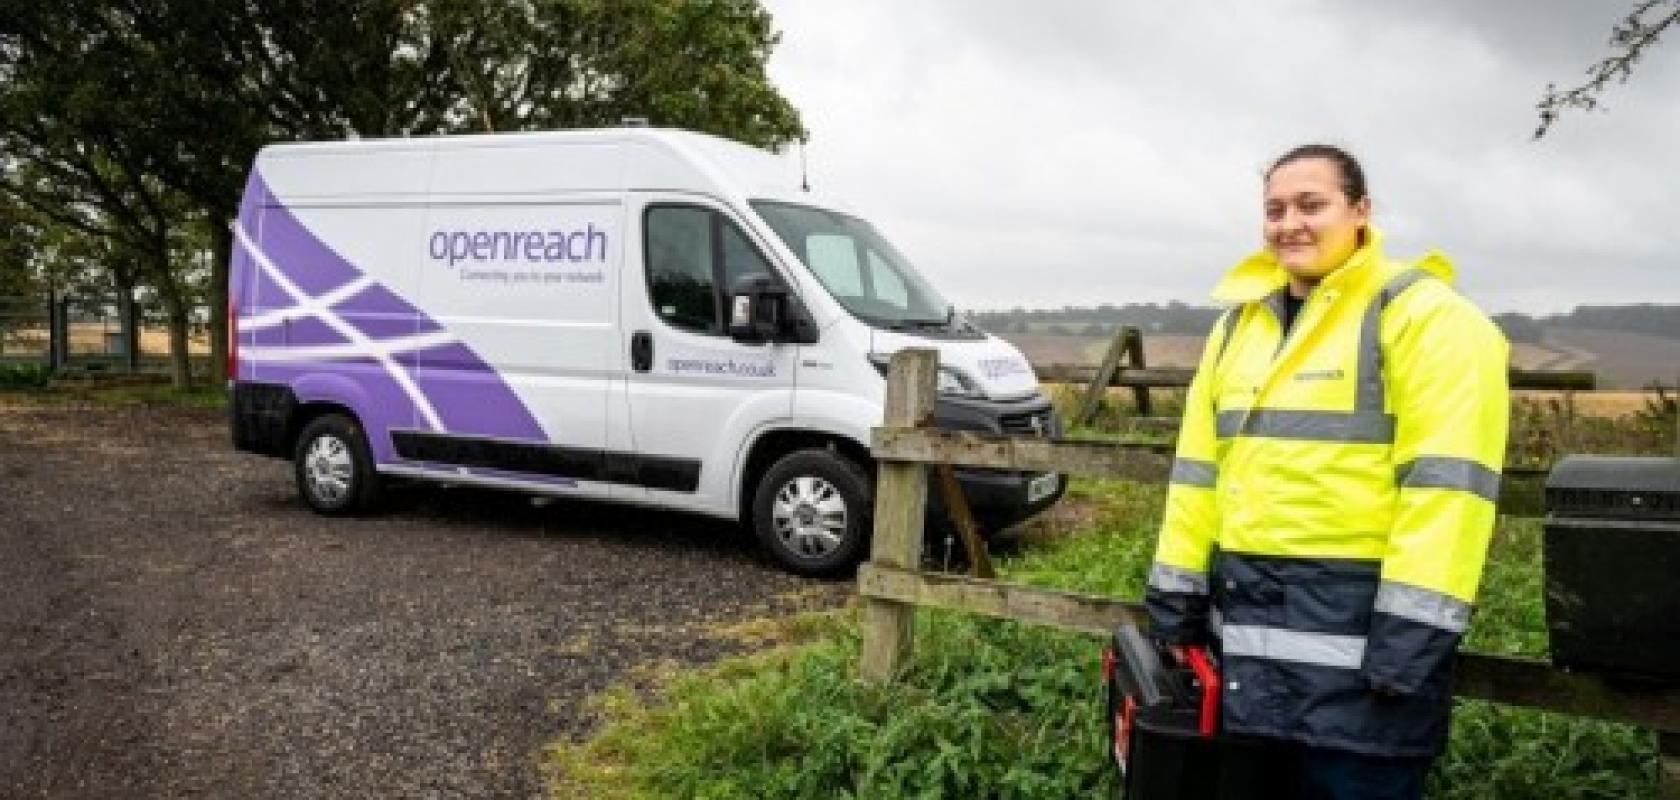 Openreach is building a new fibre broadband network in Scarborough